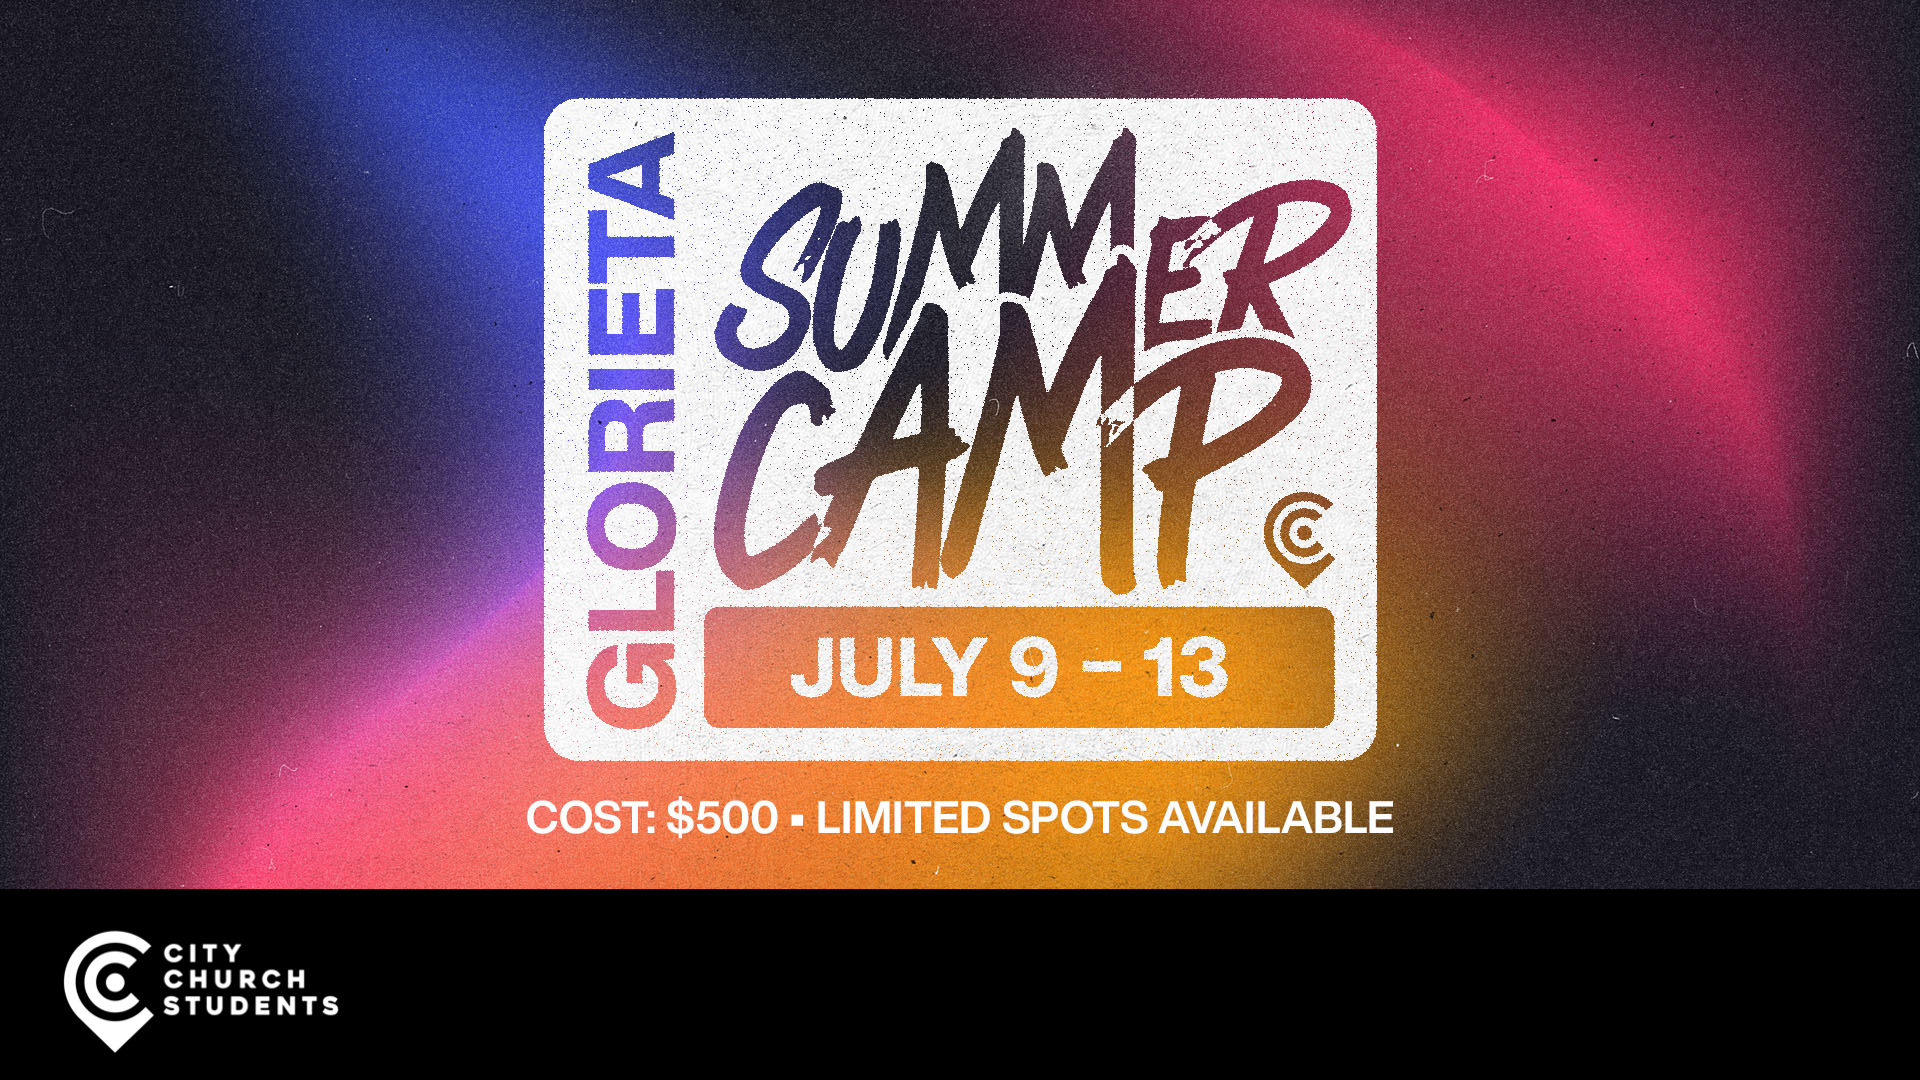 This is our biggest event of the summer. We all load up and drive to Glorieta, New Mexico for summer camp. We go “Rec Camp” which is hosted by Student Life (a ministry branch from Lifeway). For information on the camp, location, and more go to studentlife.lifeway.com. 
<br><br>
If you are looking for the camp forms to fill out, visit studentlife.lifeway.com, click prep center, then click ‘parents click here’, and enter the special REG ID: “81150” to fill out the required forms for camp.